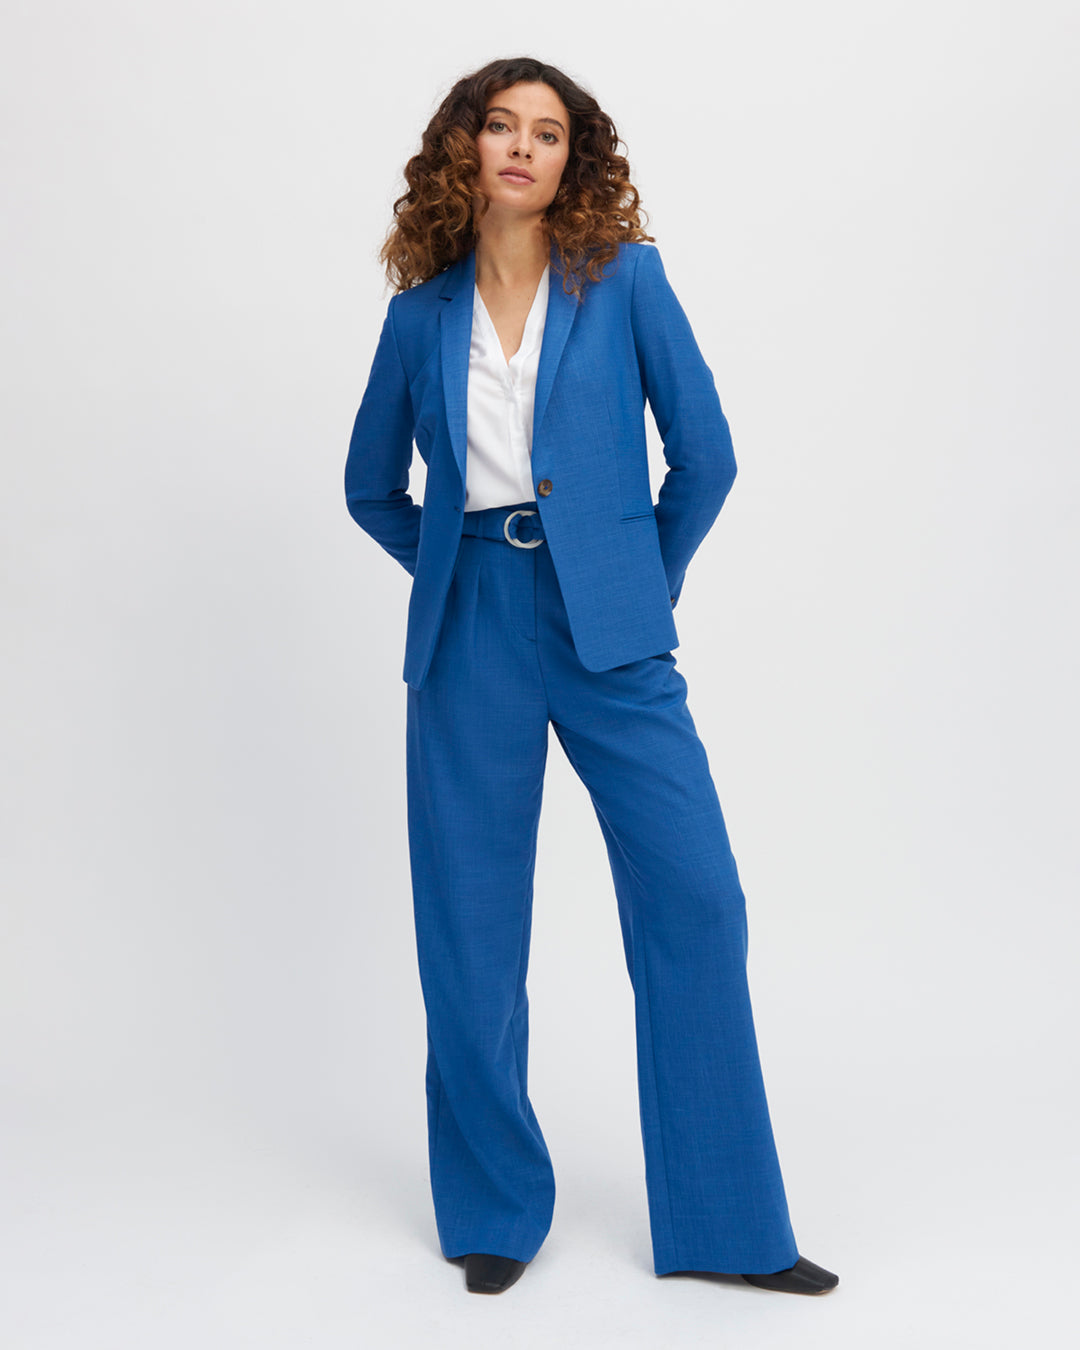 "Women's suit Paris - Fitted cut - Single breasted - Piped pockets - Inside pockets - Buttonned cuffs - Fully lined - 17H10 - Women's suits Paris"